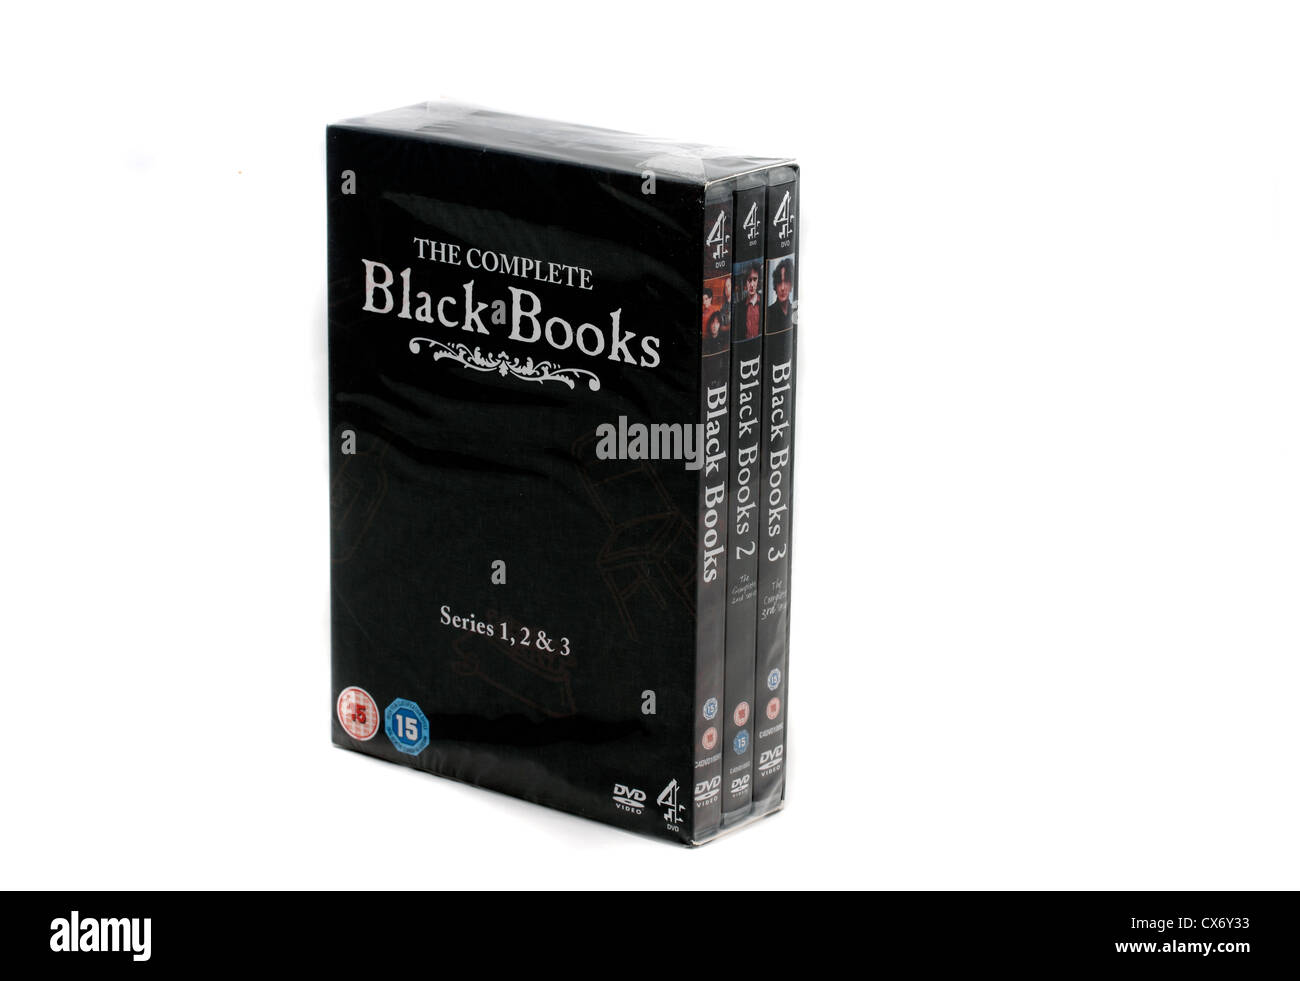 The Complete Black Books (3 series) DVD boxed set Stock Photo - Alamy